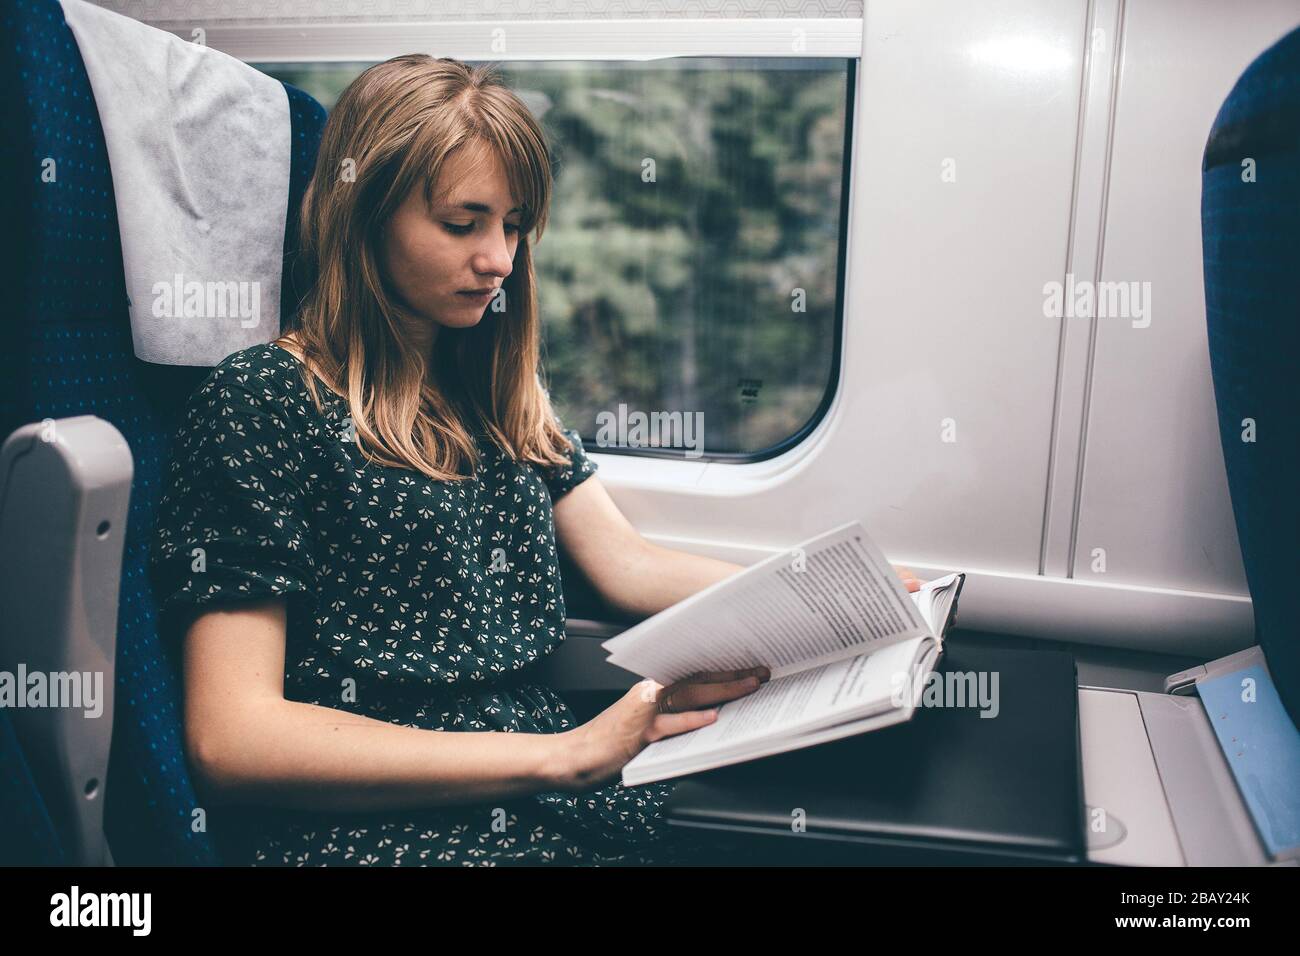 Young woman travel in train. Sit alone and read book. Concious and concentrated on process. Smart woman studying or reading. Alone inside train. Stock Photo